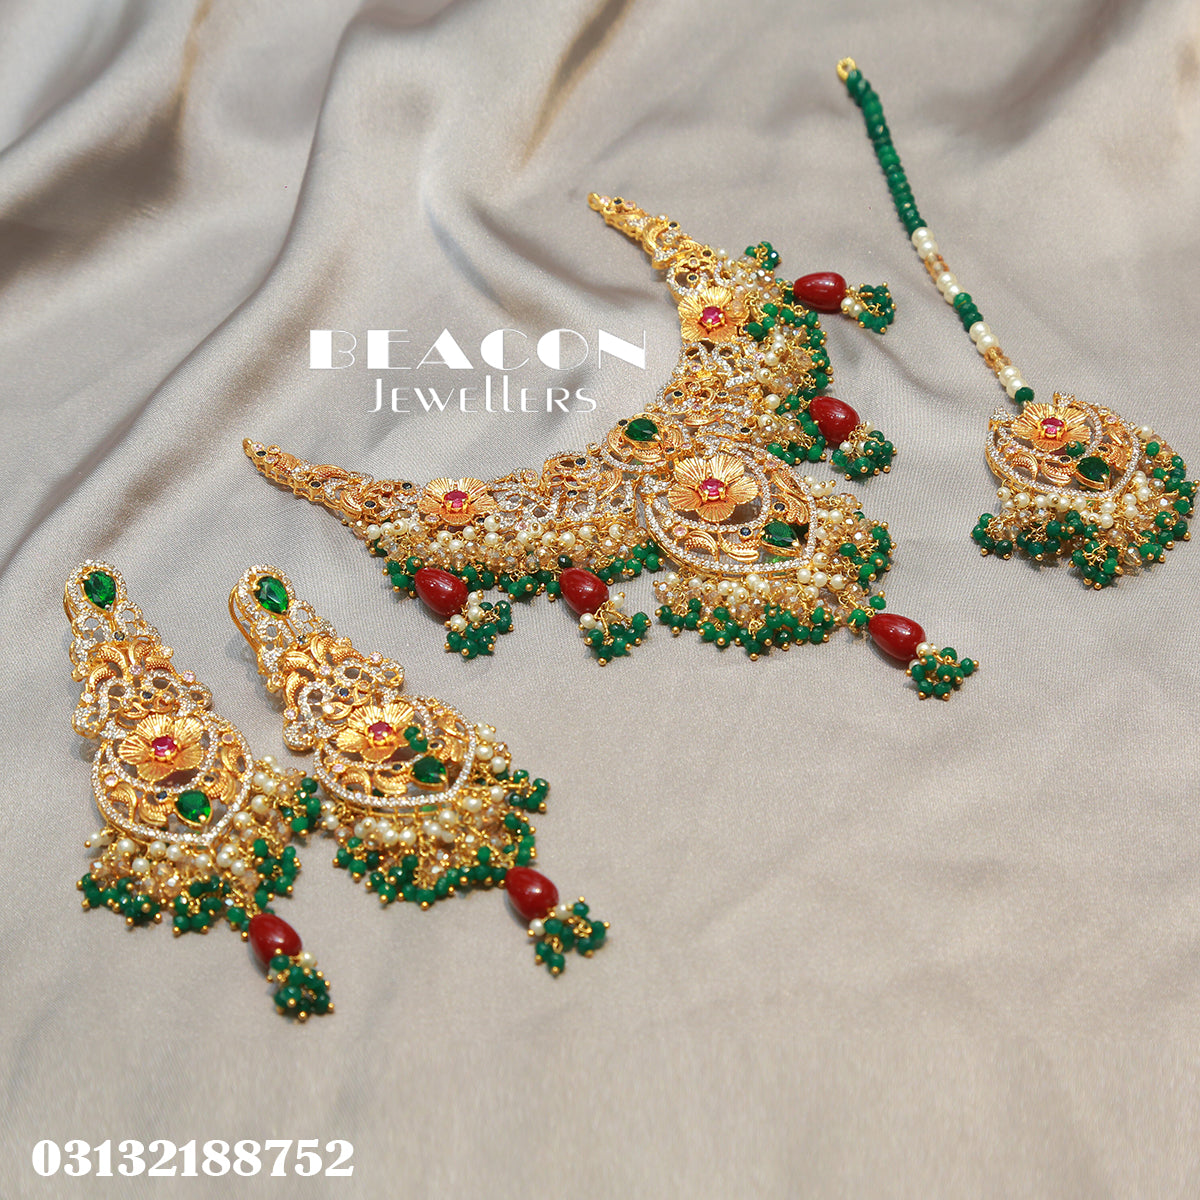 Necklace with Bindi and Earrings 37